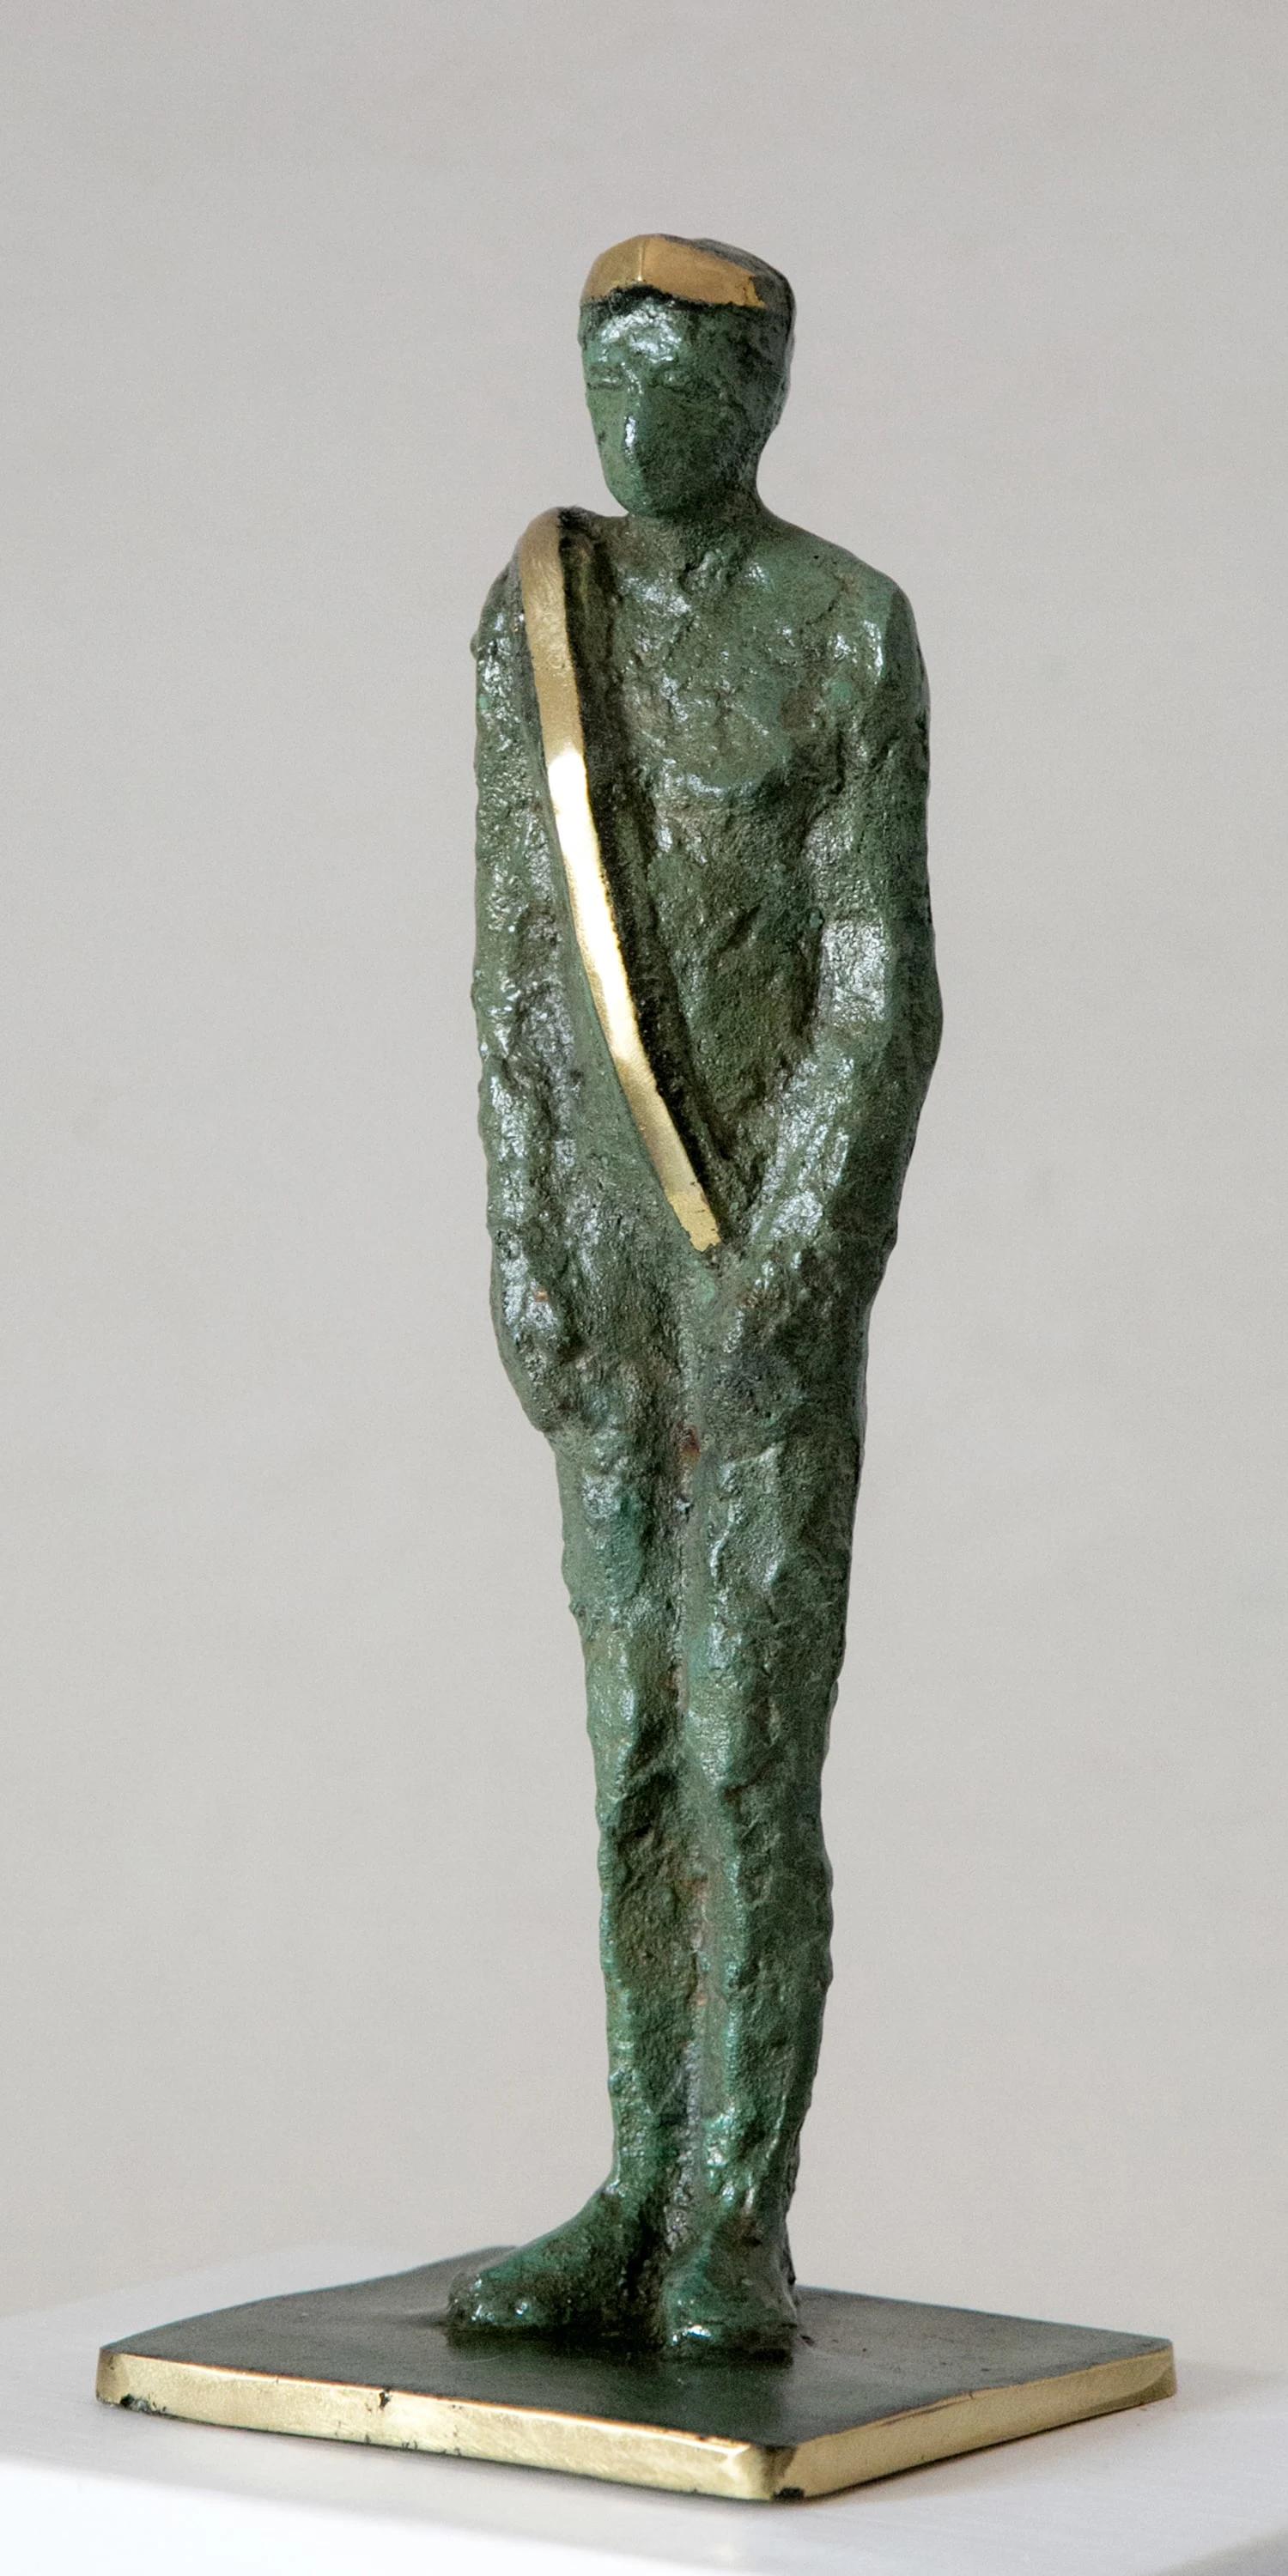 "Alexandria" Bronze Sculpture 12" x 3" x 2" inch by Sarkis Tossonian

Sarkis Tossoonian was born in Alexandria in 1953. He graduated from the Faculty of Fine Arts/Sculpture in 1979. He started exhibiting in individual and group exhibitions in